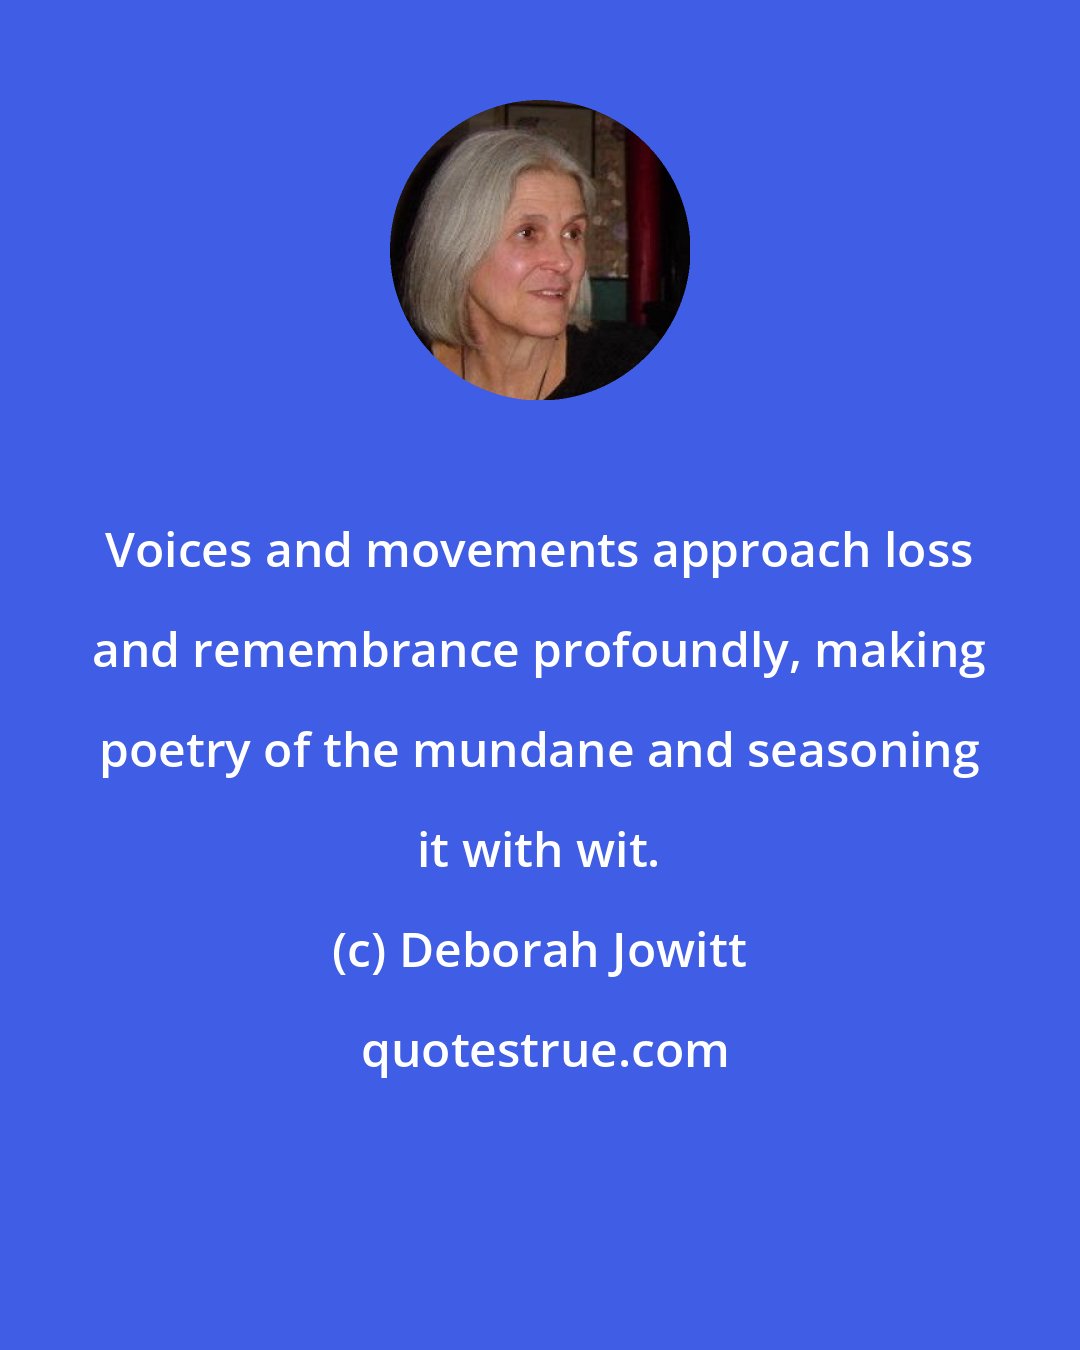 Deborah Jowitt: Voices and movements approach loss and remembrance profoundly, making poetry of the mundane and seasoning it with wit.